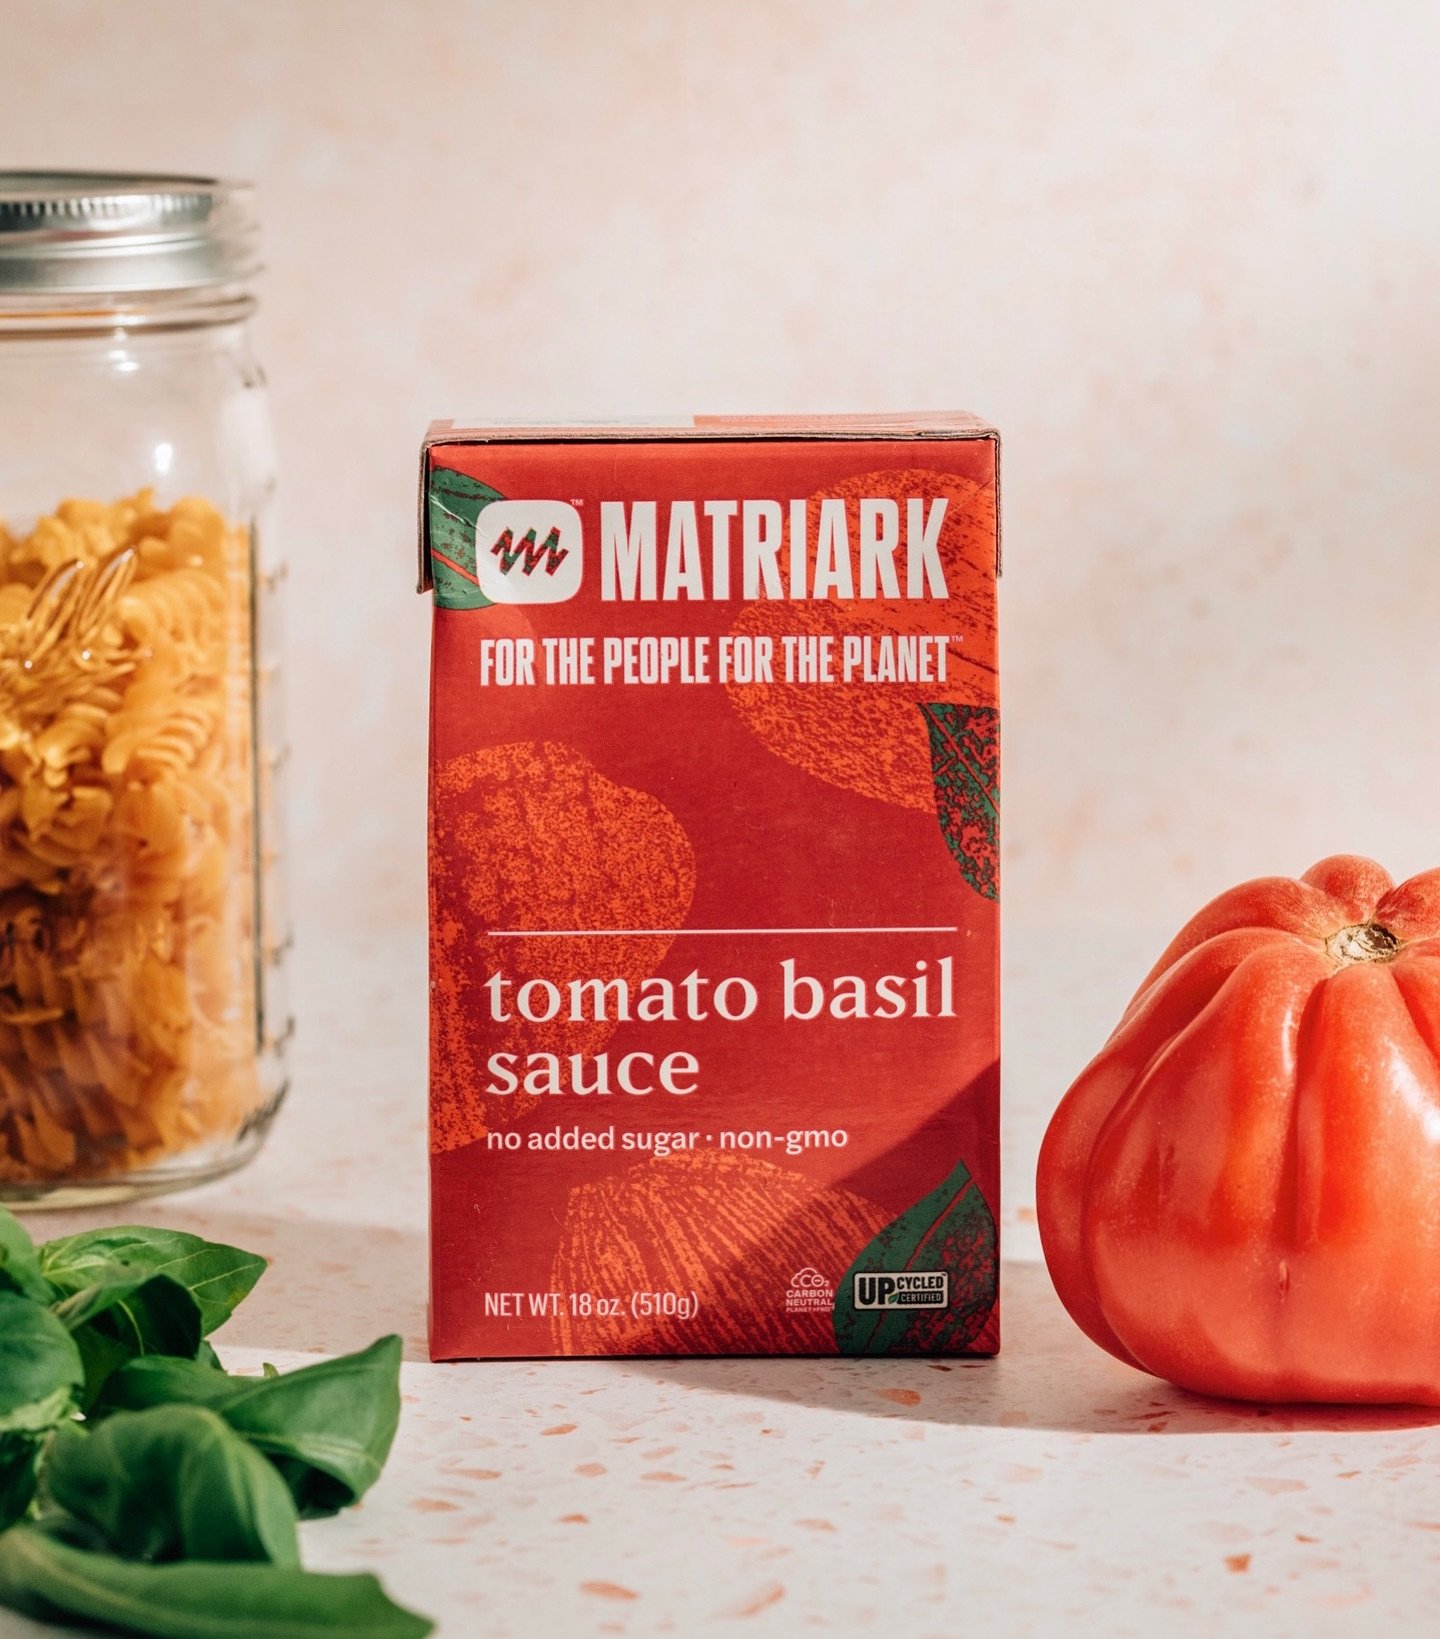 Just a reminder that you can get FREE SAUCE by filling out and following the steps on the form in our bio! It&rsquo;s the perfect chance to give Matriark a try if you haven&rsquo;t yet. Entries close on May 16th!🍅🍅🍅

#upcycledfood #upcycled #susta